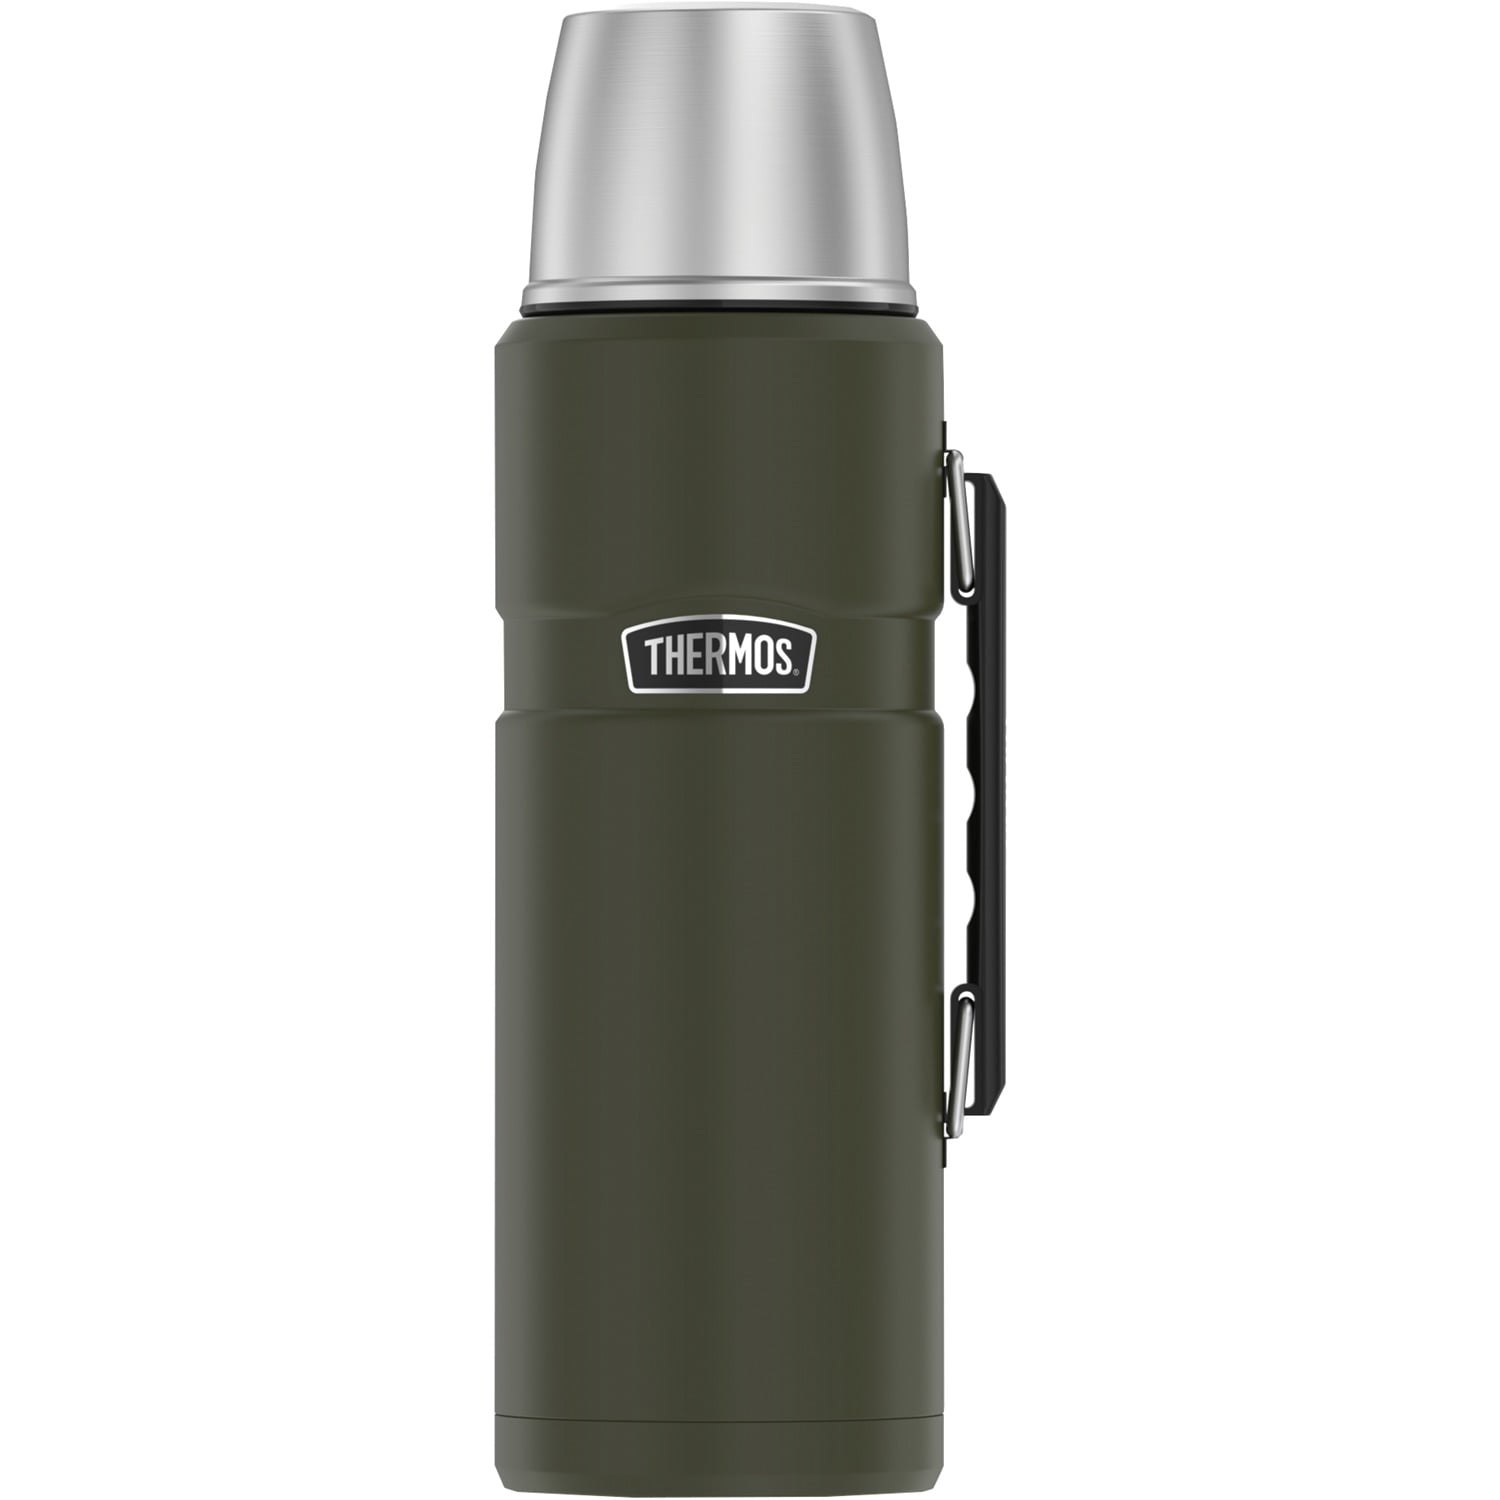 Thermos Add-A-Cup Glass Beverage Bottle 